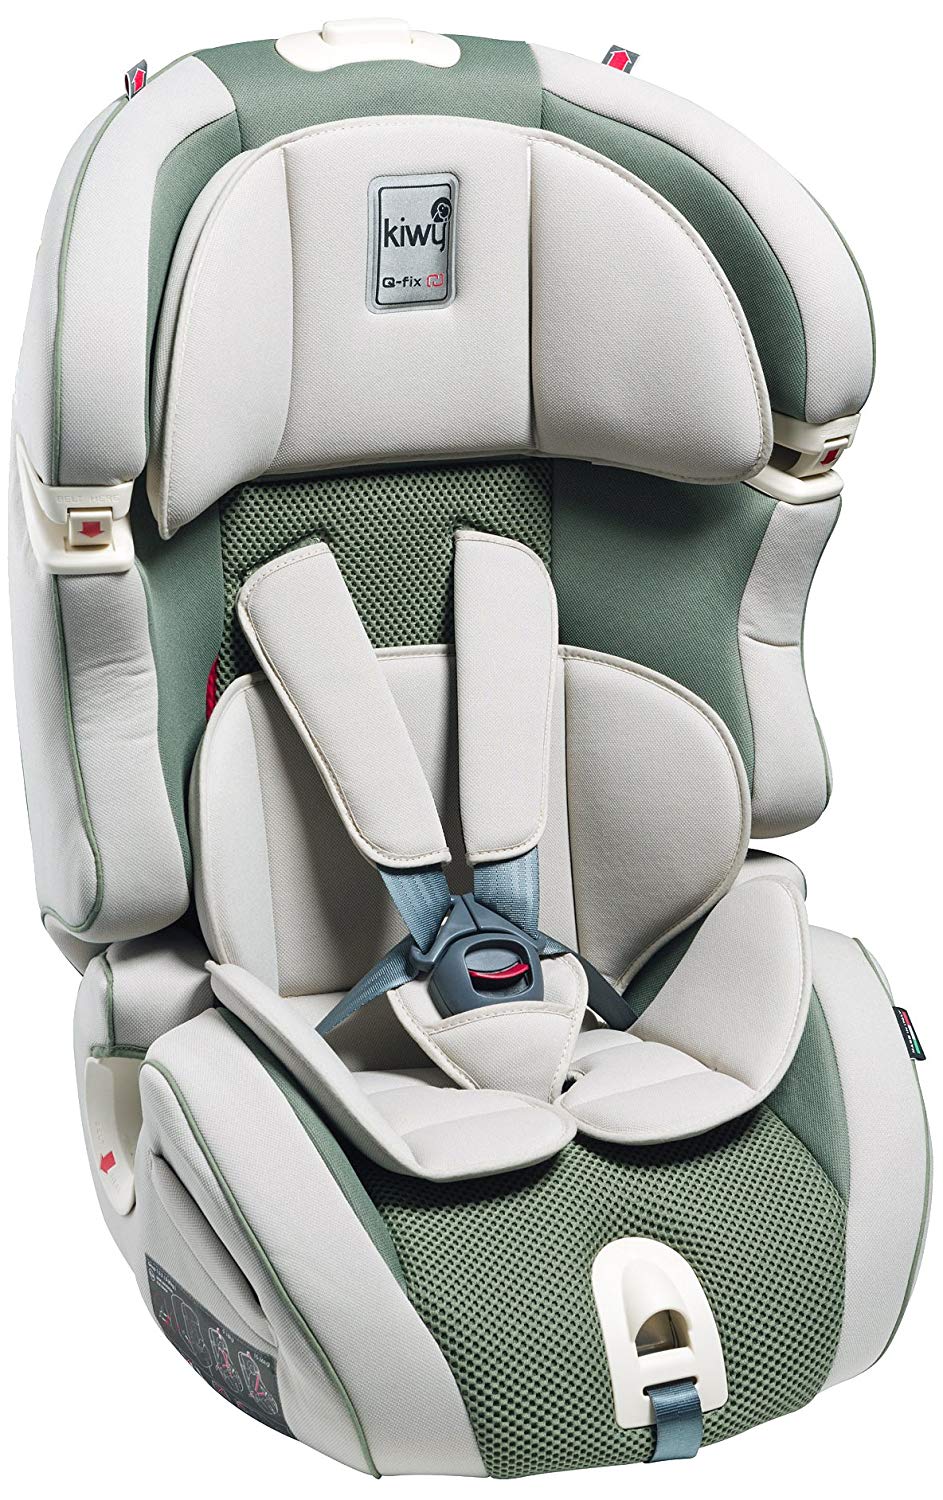 Kiwy SLF123 Q (14103KW05B Child Car Seat Group 1/2/3 9-36 kg with Q-Fix Adapter for Isofix Child Car Safety Seat ECE R44/04, Aloe